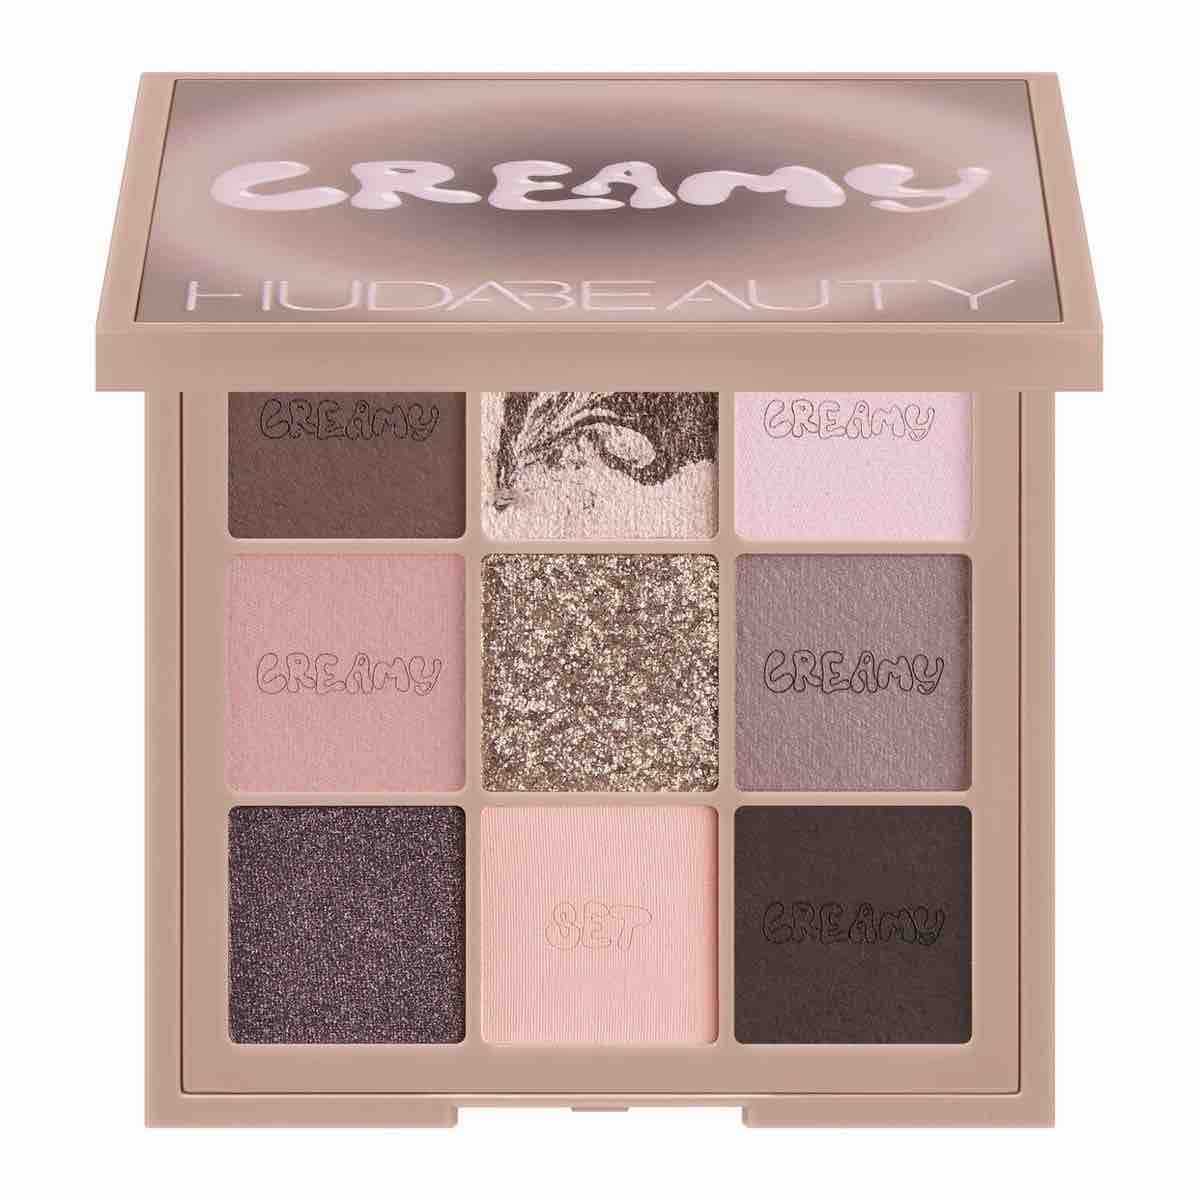 Palette Creamy Obsessions Huda Beauty Greige